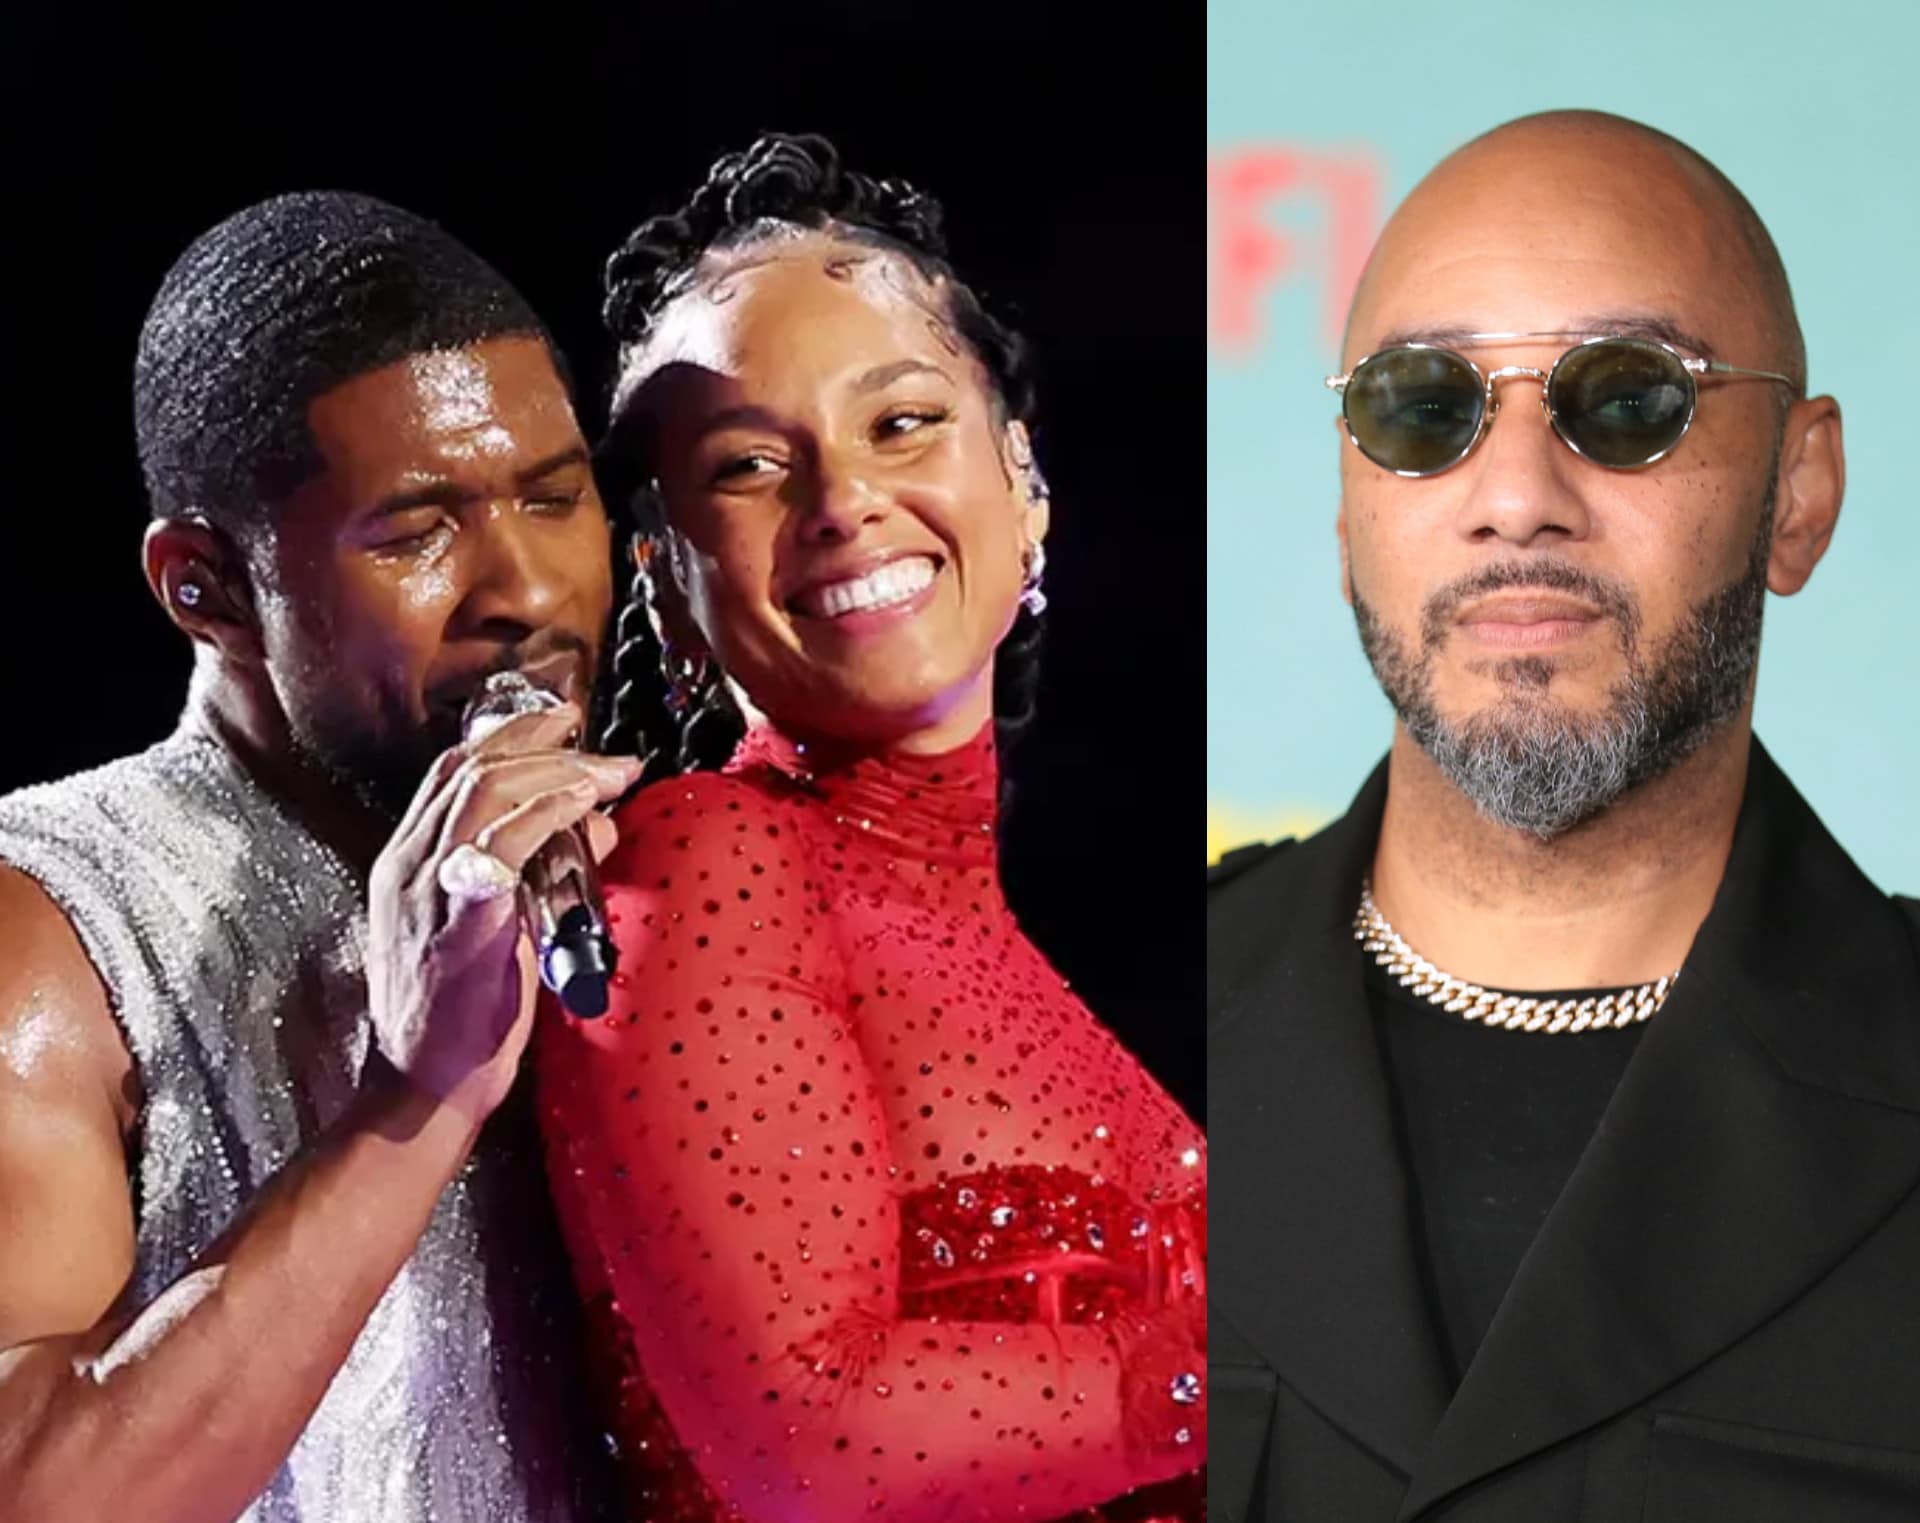 Swizz Beatz Reacts To Usher & Alicia Keys' Steamy Viral Moment At Super Bowl Halftime Show